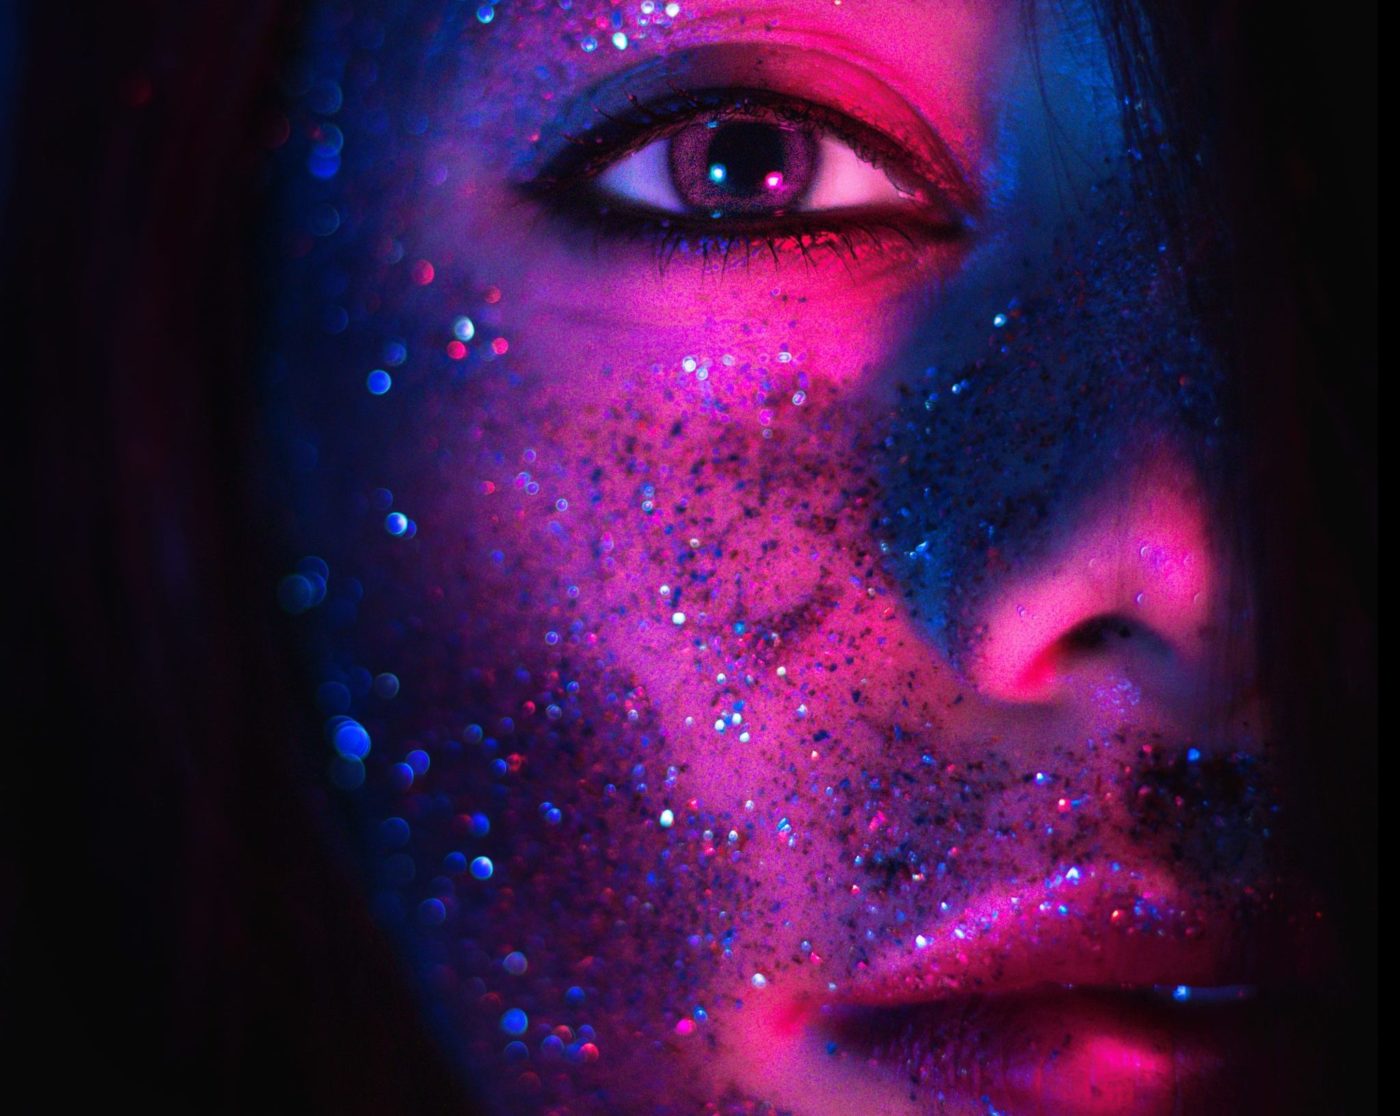 A person's face with glitter in all kinds of colors